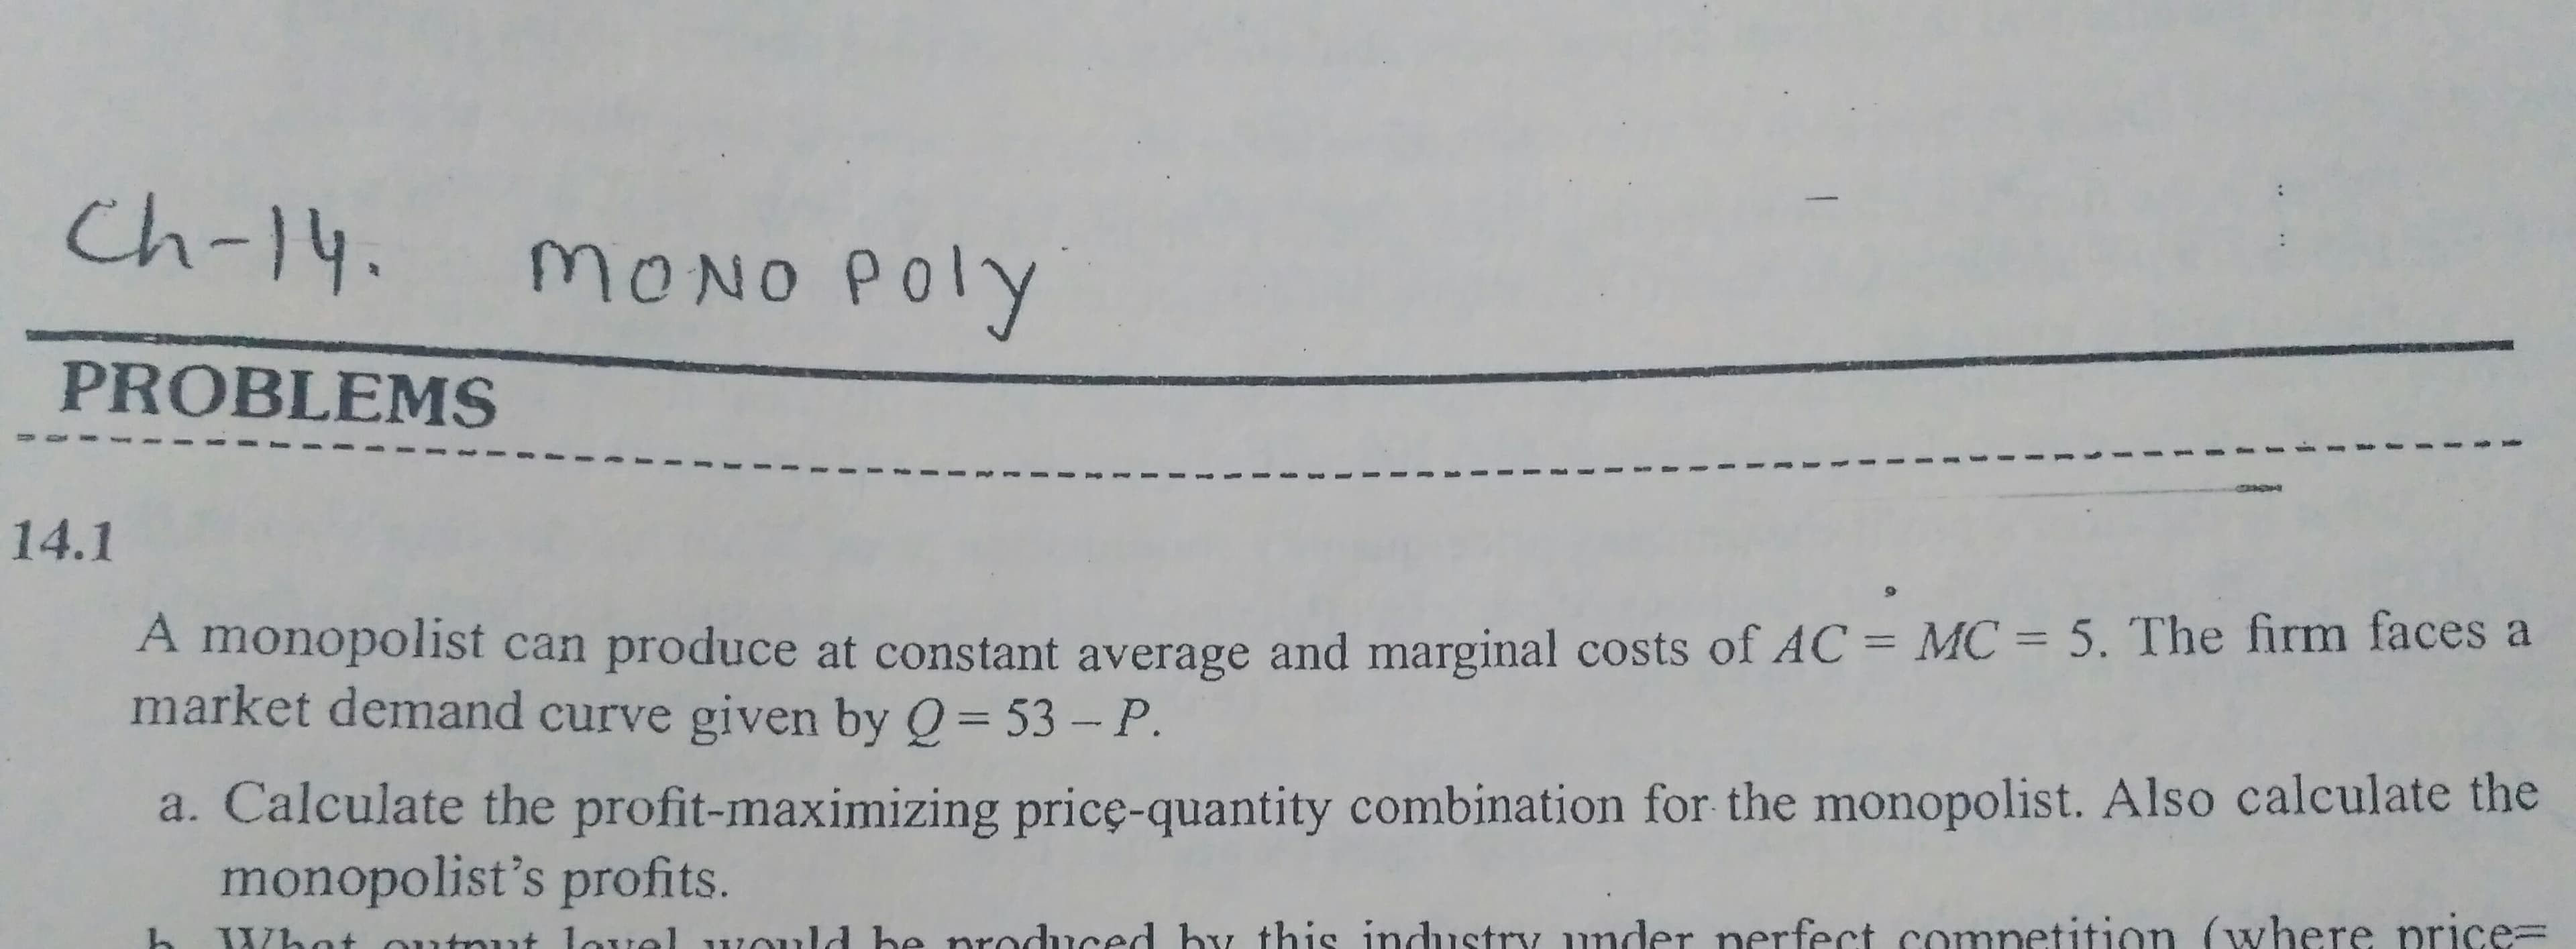 Ch-14.
MONO POly
PROBLEMS
14.1
A monopolist can produce at constant average and marginal costs of AC = MC = 5. The firm faces a
market demand curve given by Q= 53 -P.
a. Calculate the profit-maximizing pricę-quantity combination for the monopolist. Also calculate the
monopolist's profits.
What outnut lovol would be produced by this industry under nerfect competition (where price=
3.
